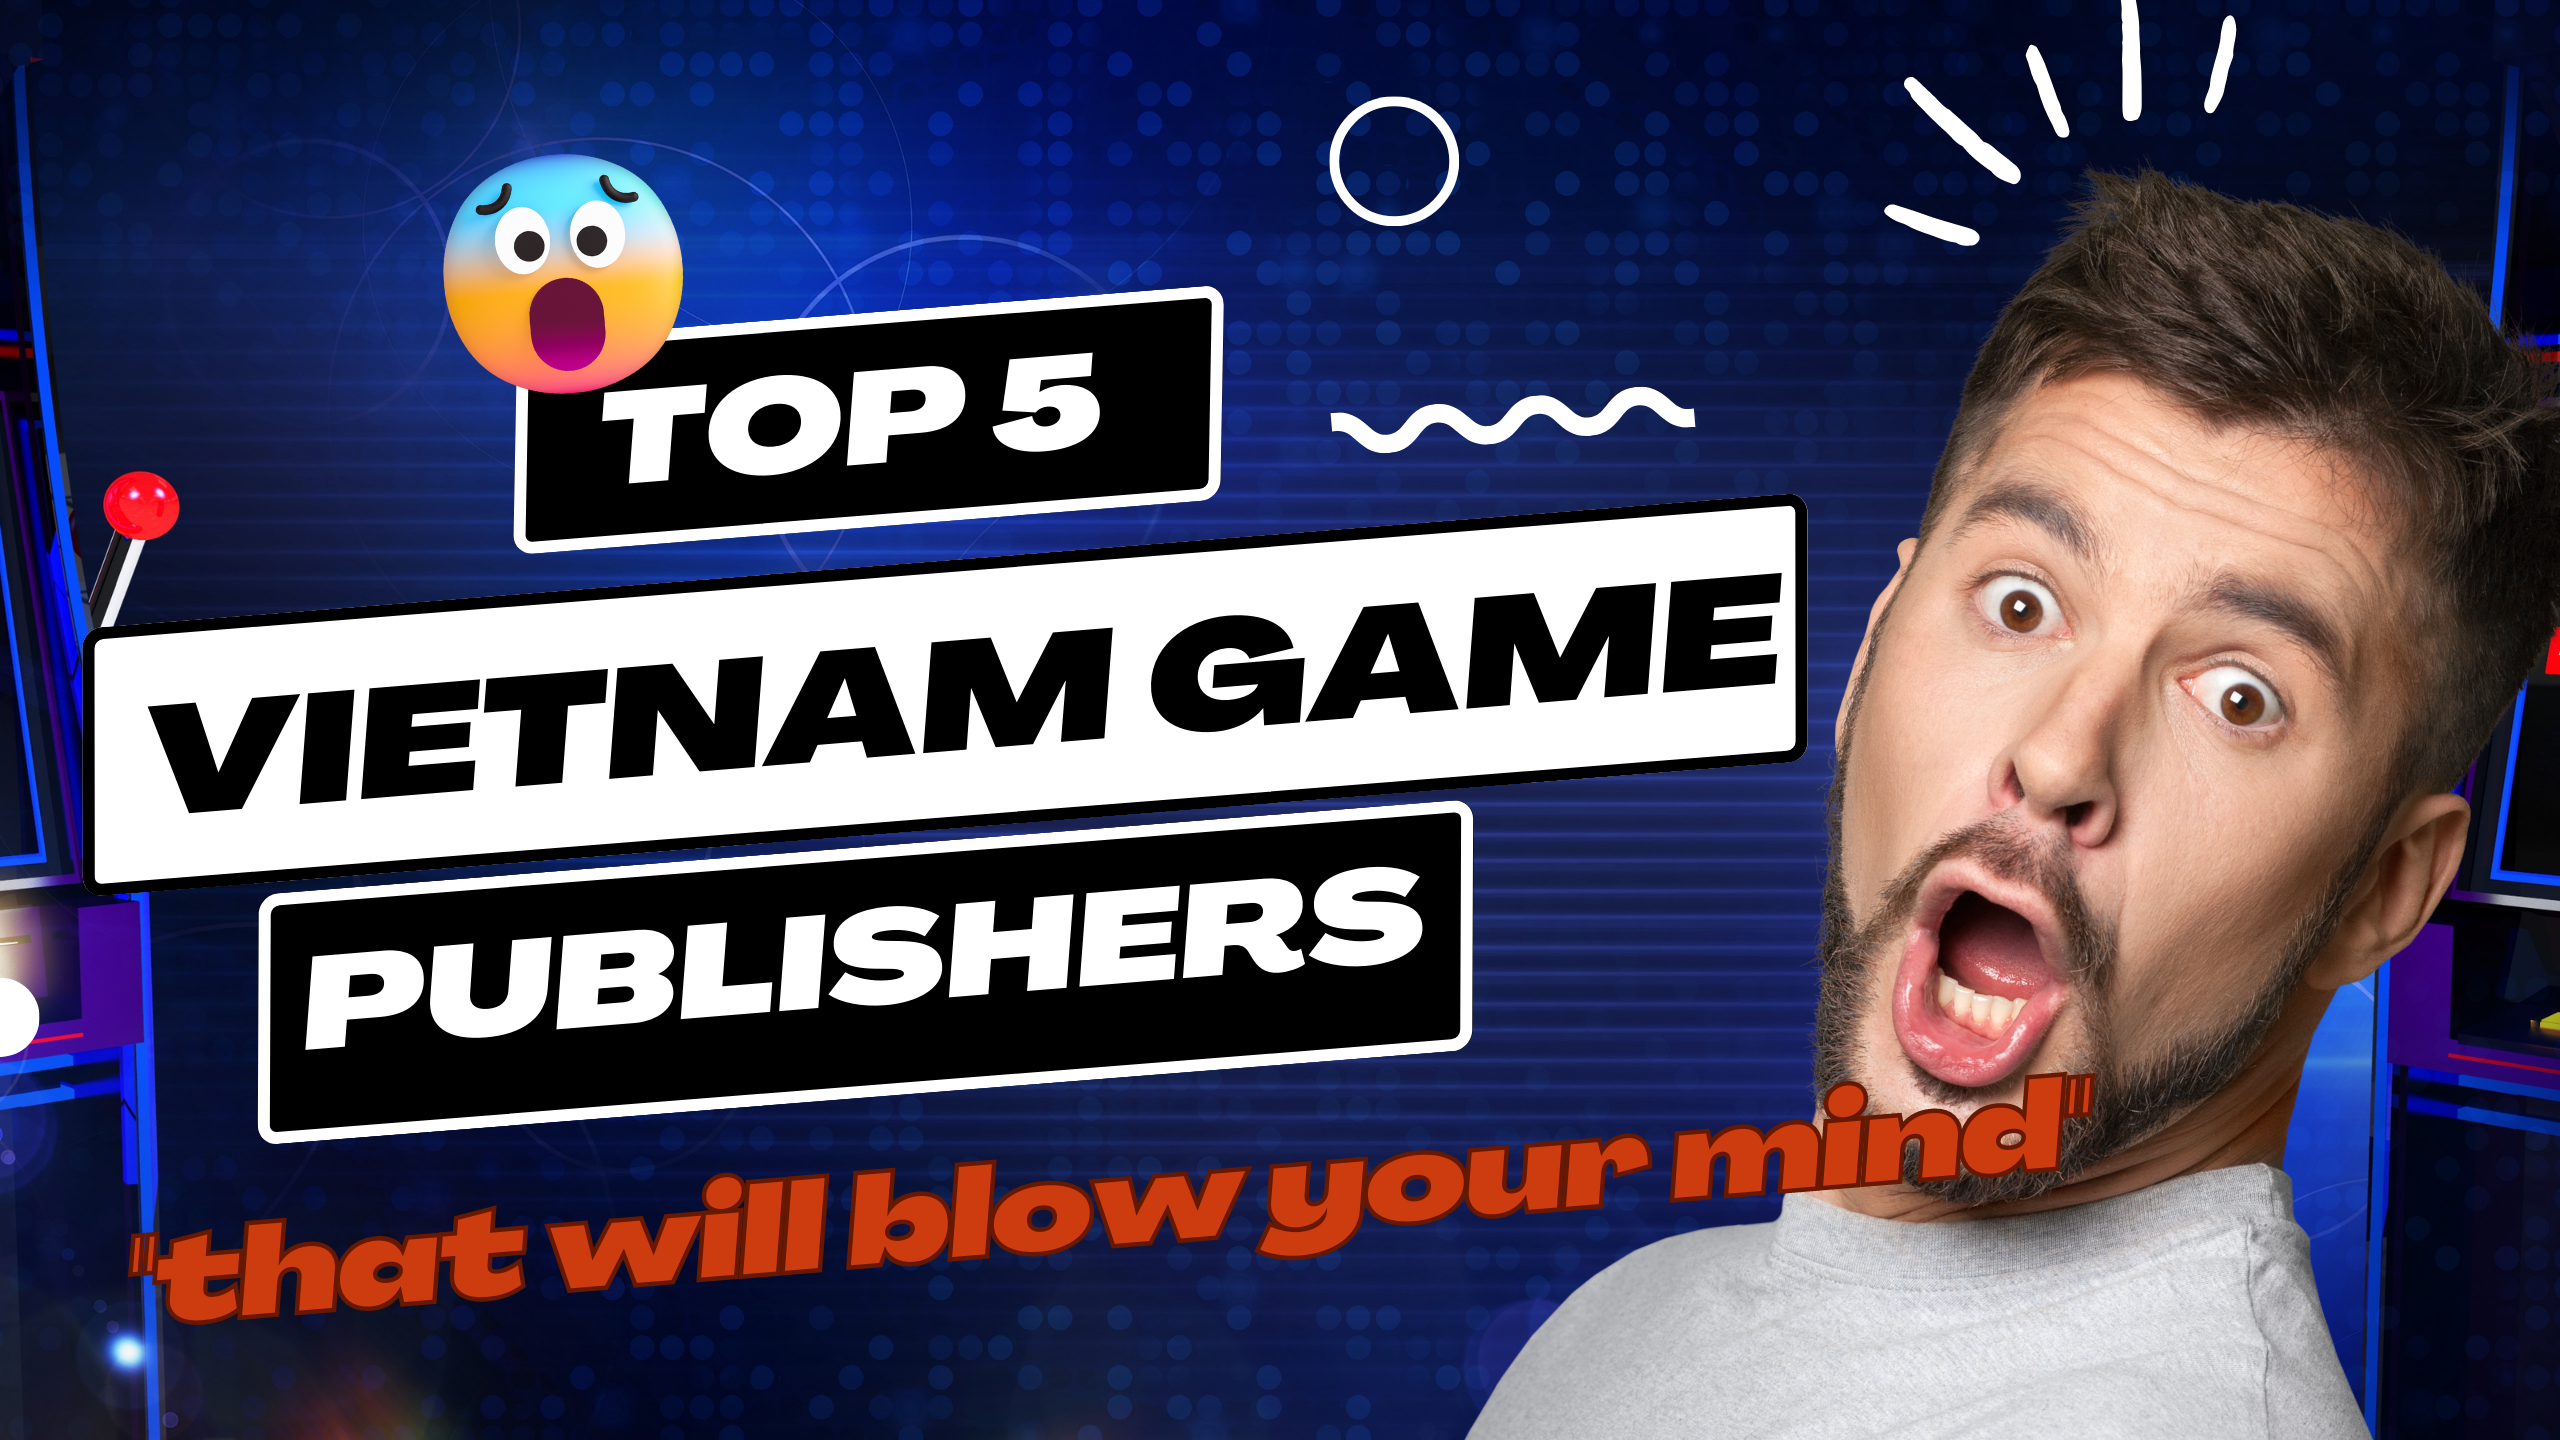 Top 5 successful game publishers in Vietnam